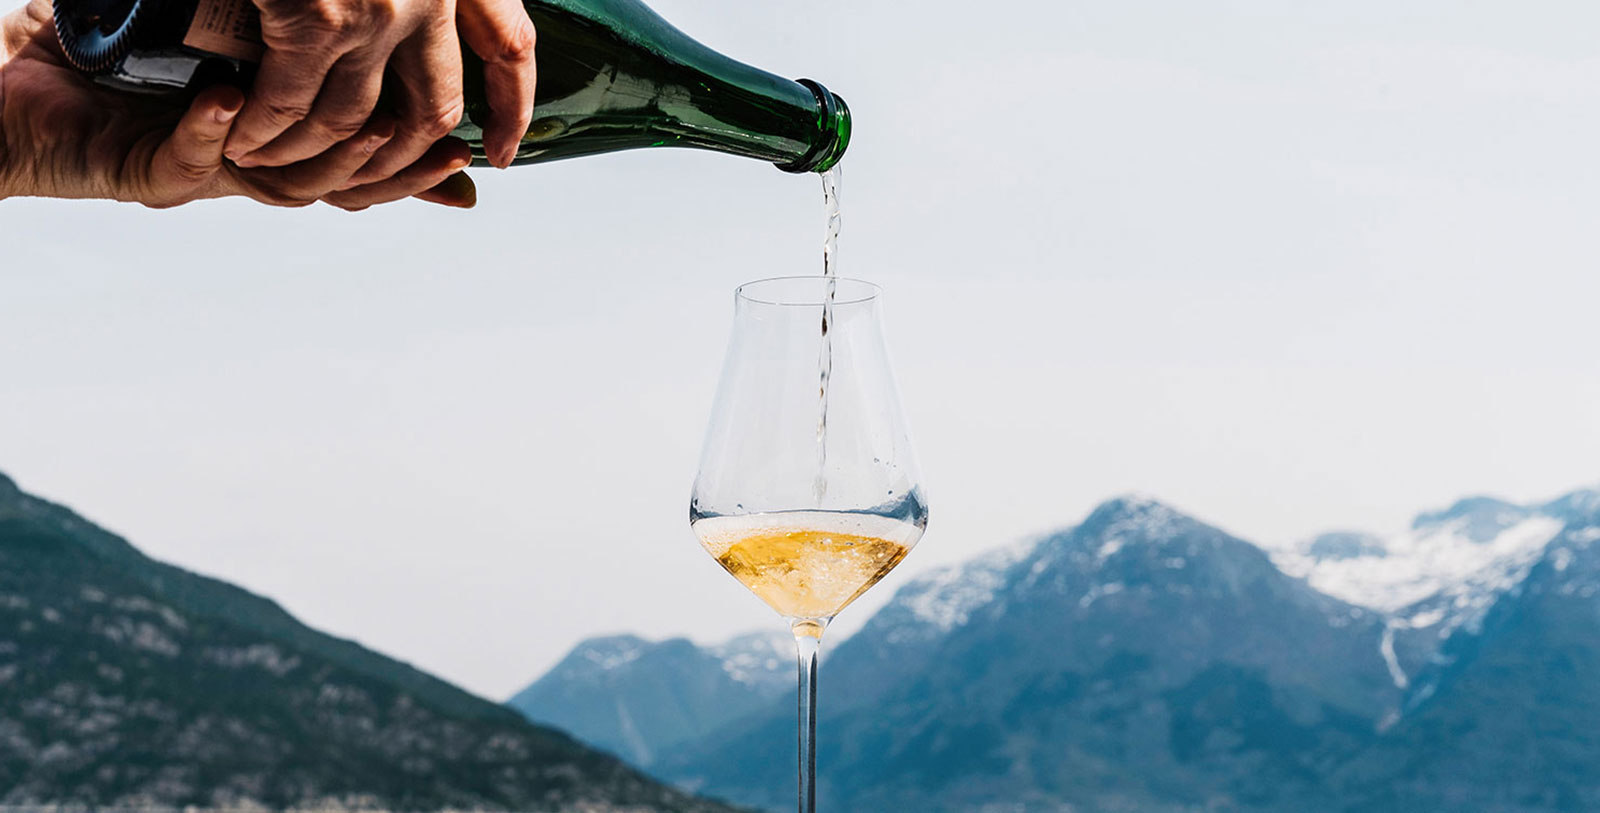 Experience the cider houses in Hardanger, which are known for their “Nordic champagne”.